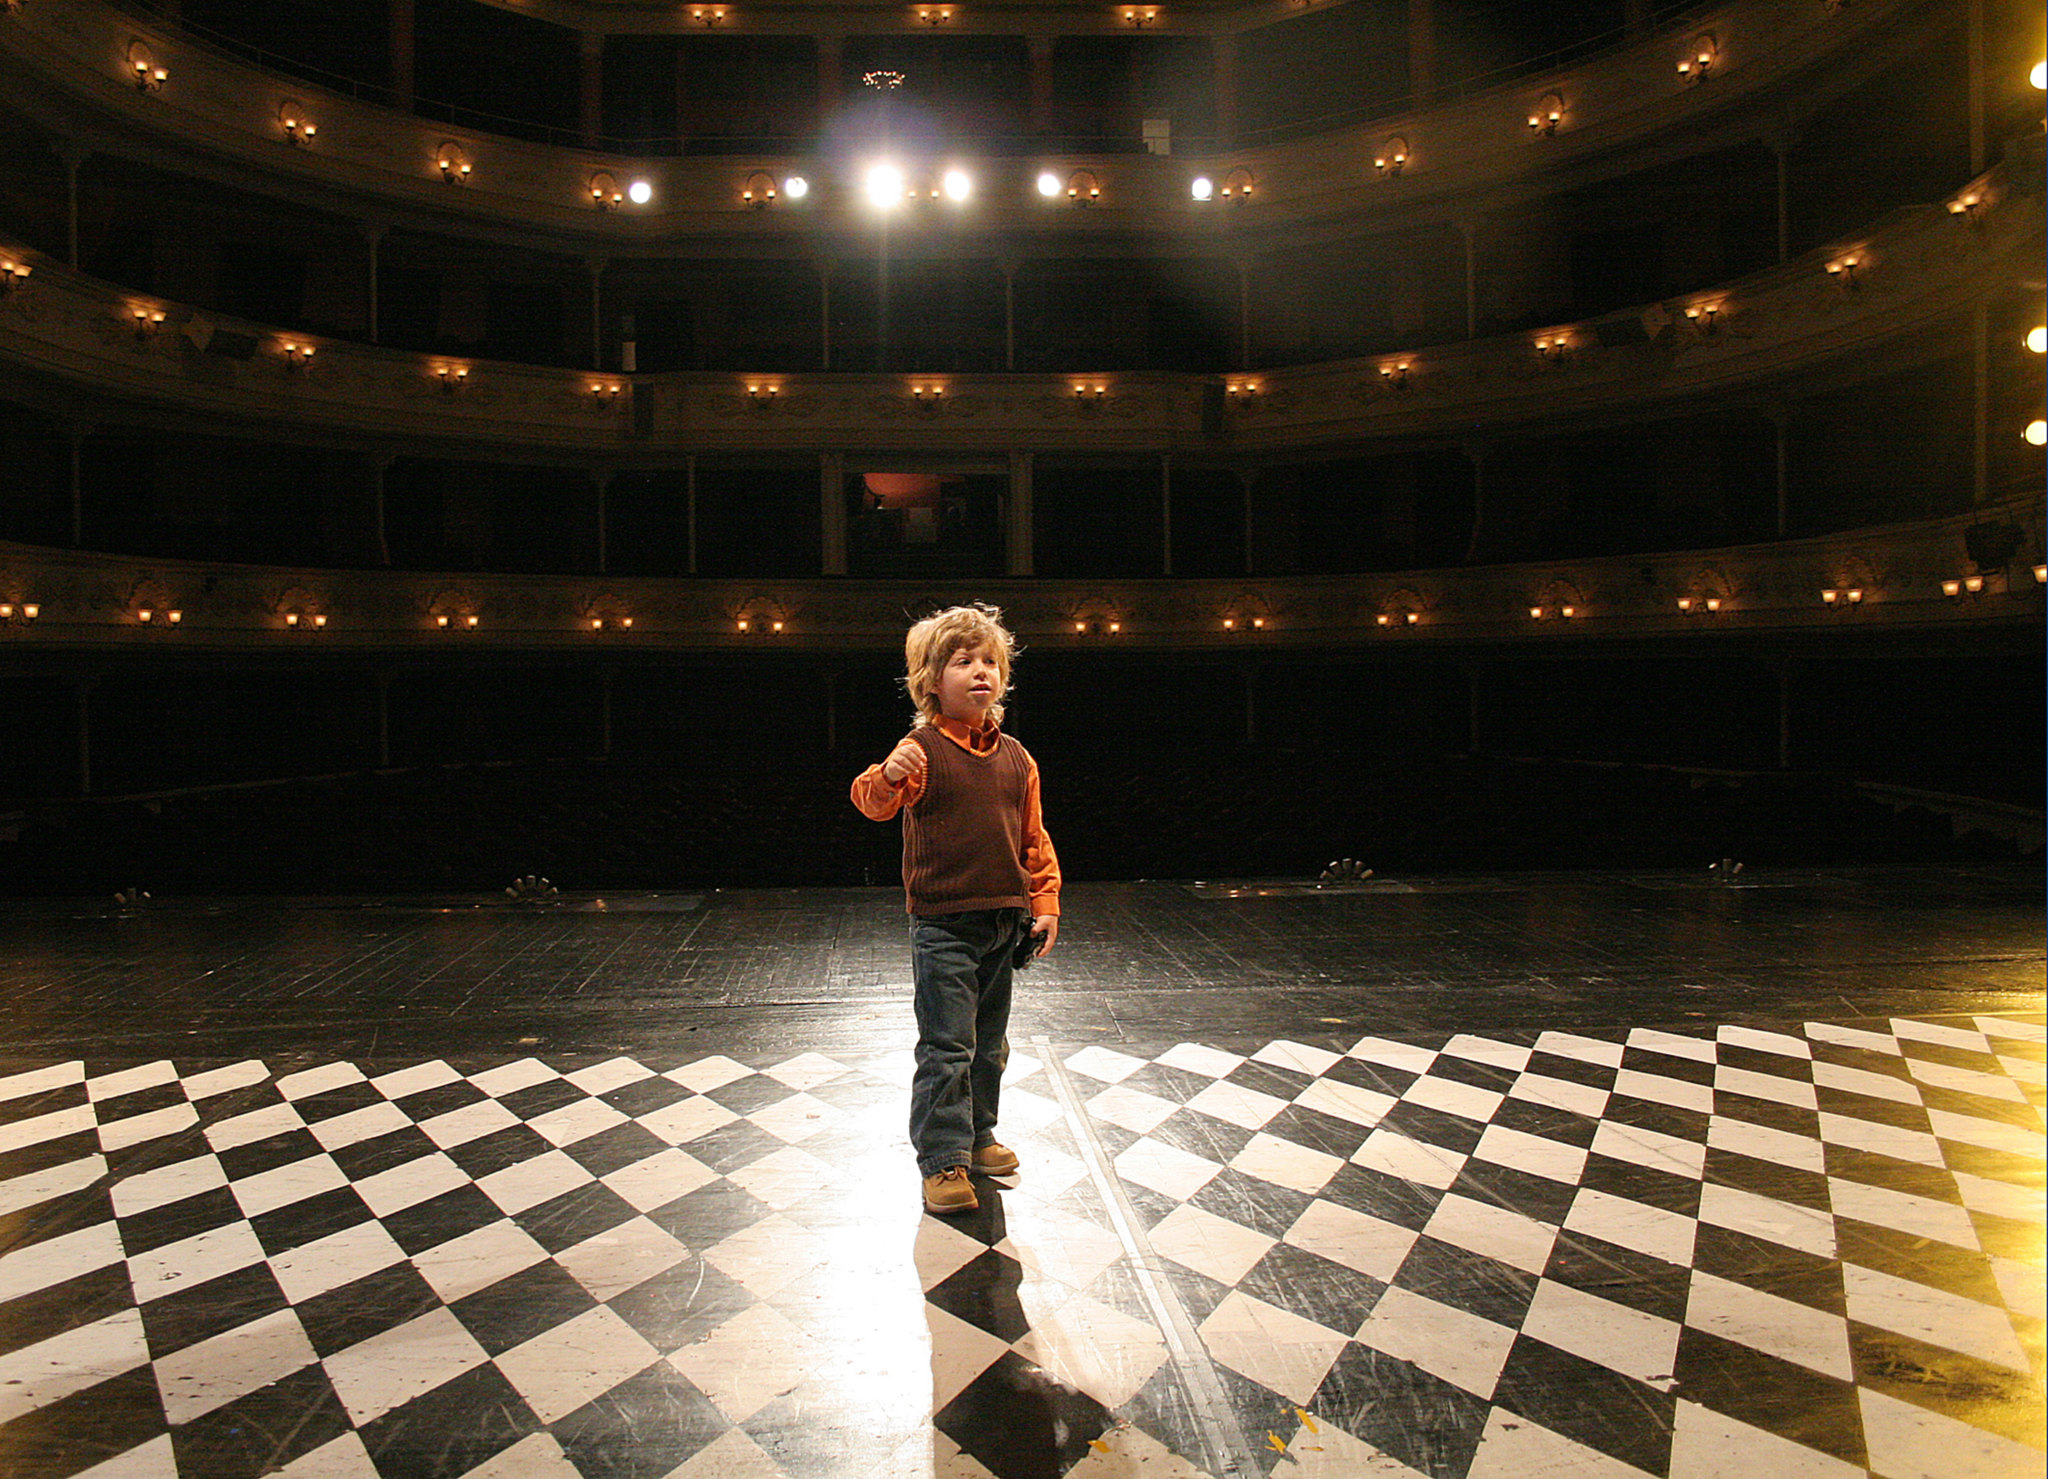 The theatrical child